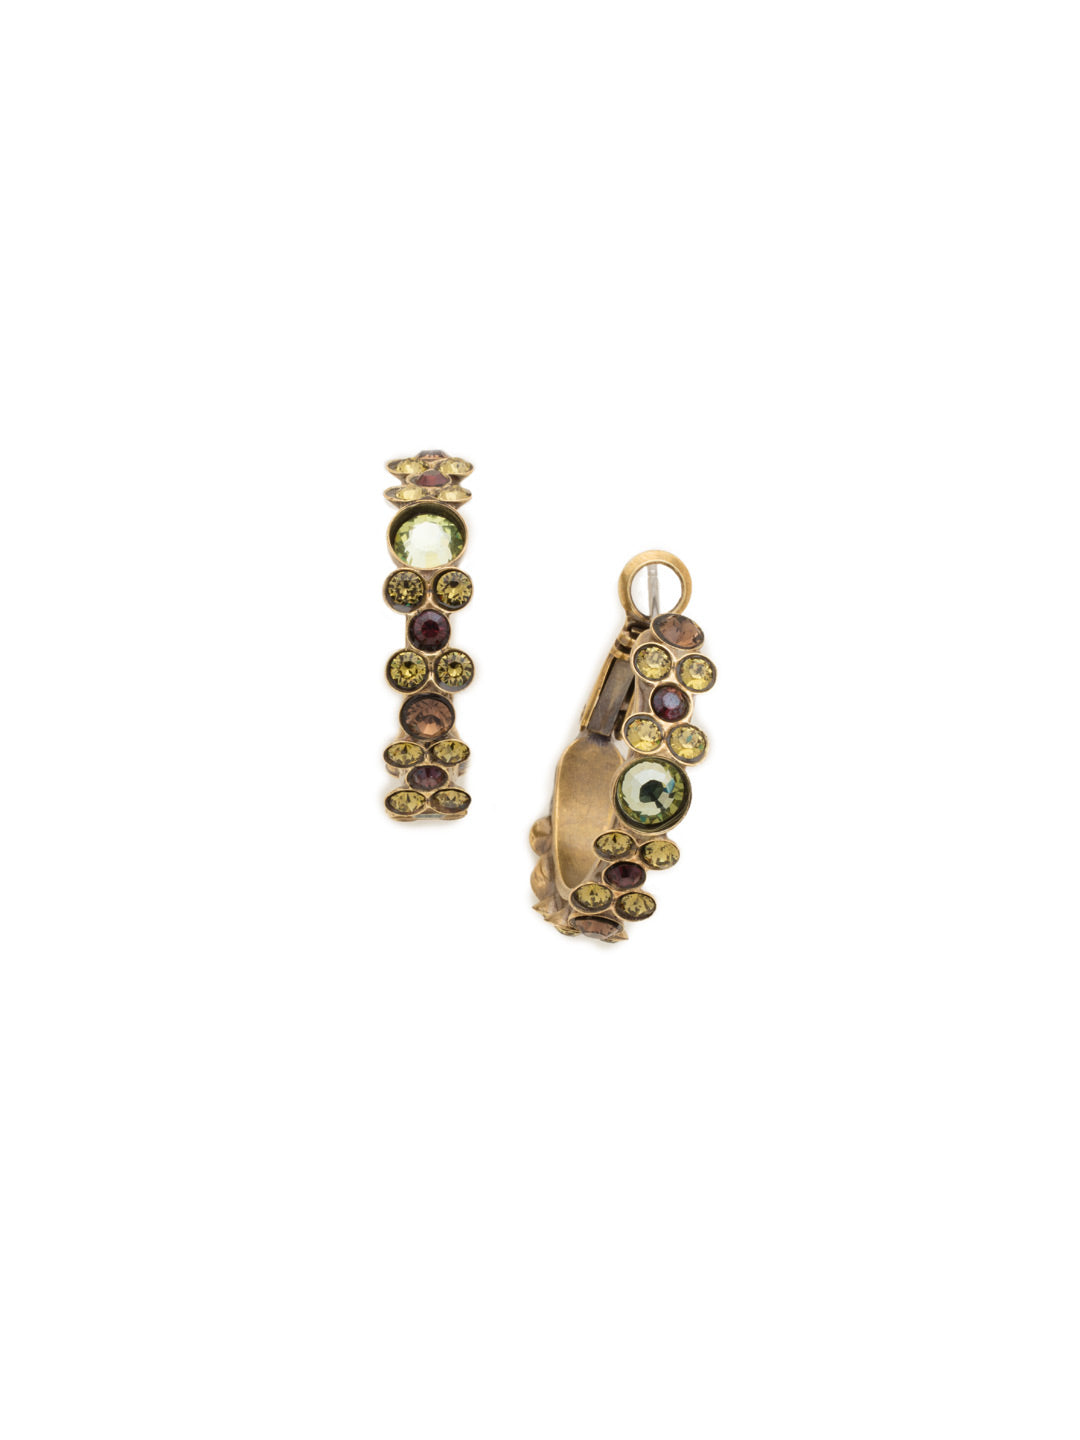 Floral Hoop Earrings - EBP15AGGTA - <p>Intricate design, infused with gorgeous shine. A motif of floral clusters is featured here on a small, delicate hoop with a hinged post backing. From Sorrelli's Green Tapestry collection in our Antique Gold-tone finish.</p>